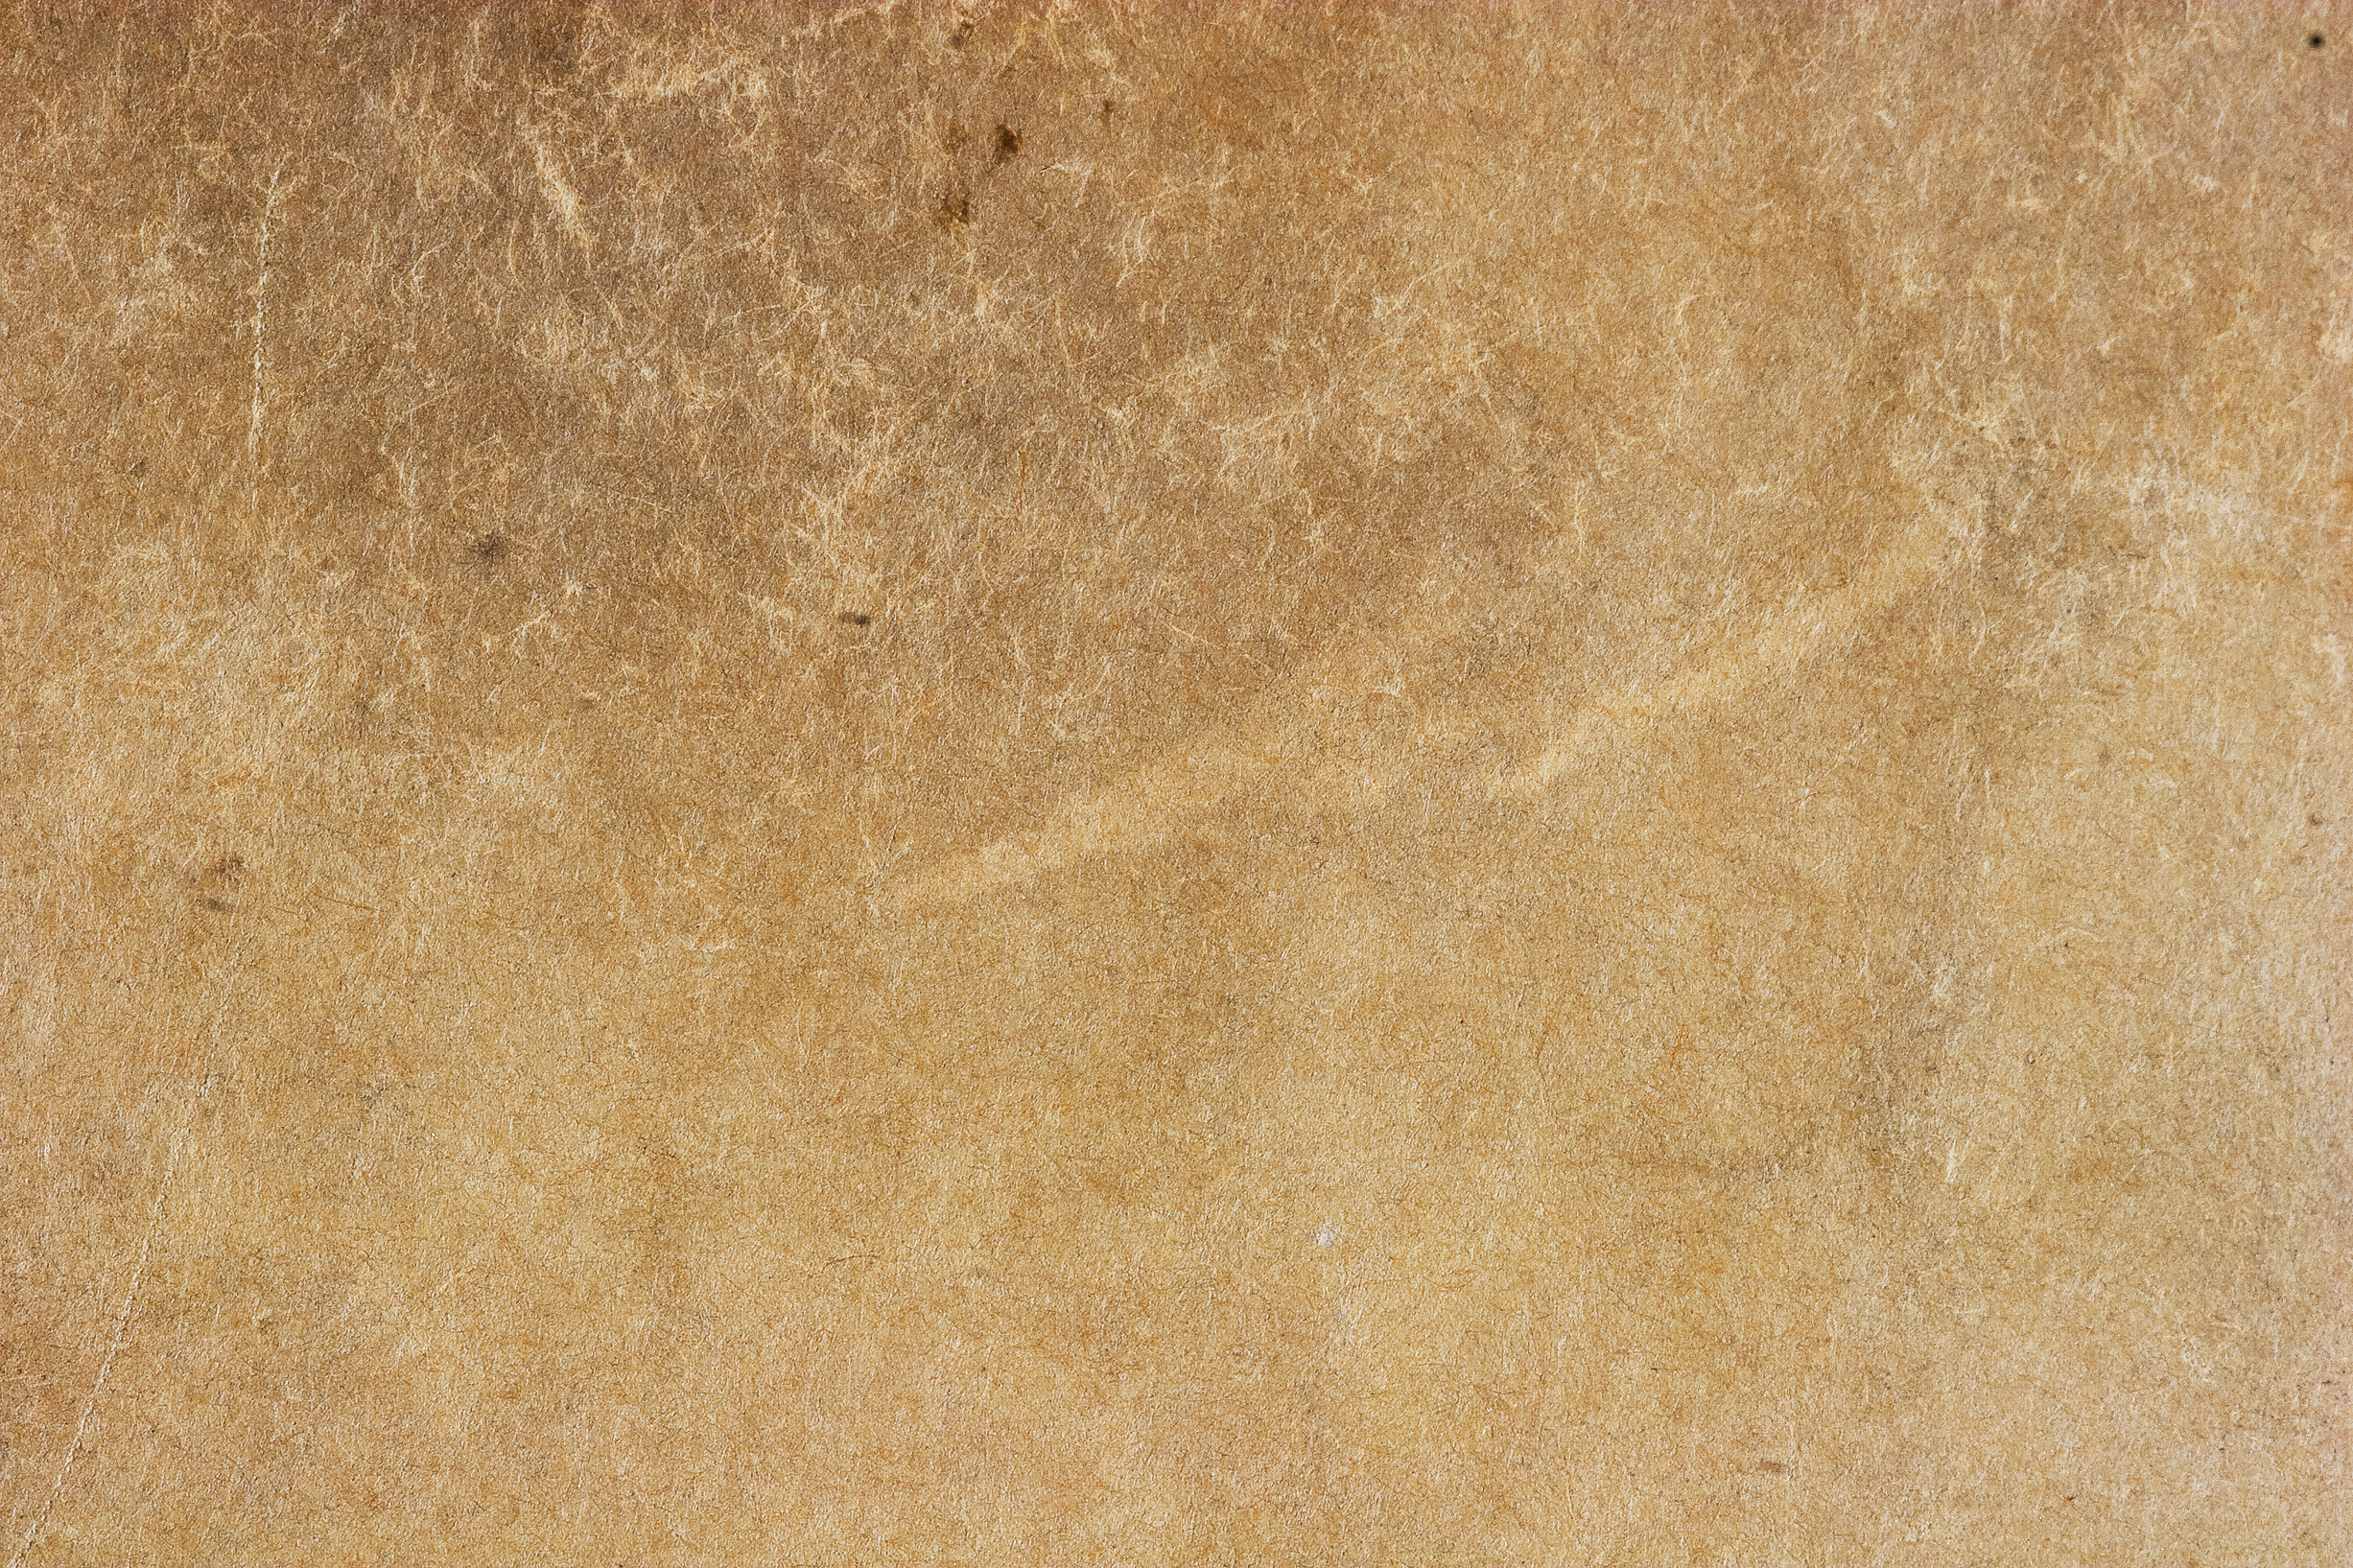 Old Paper Texture | Flickr - Photo Sharing!